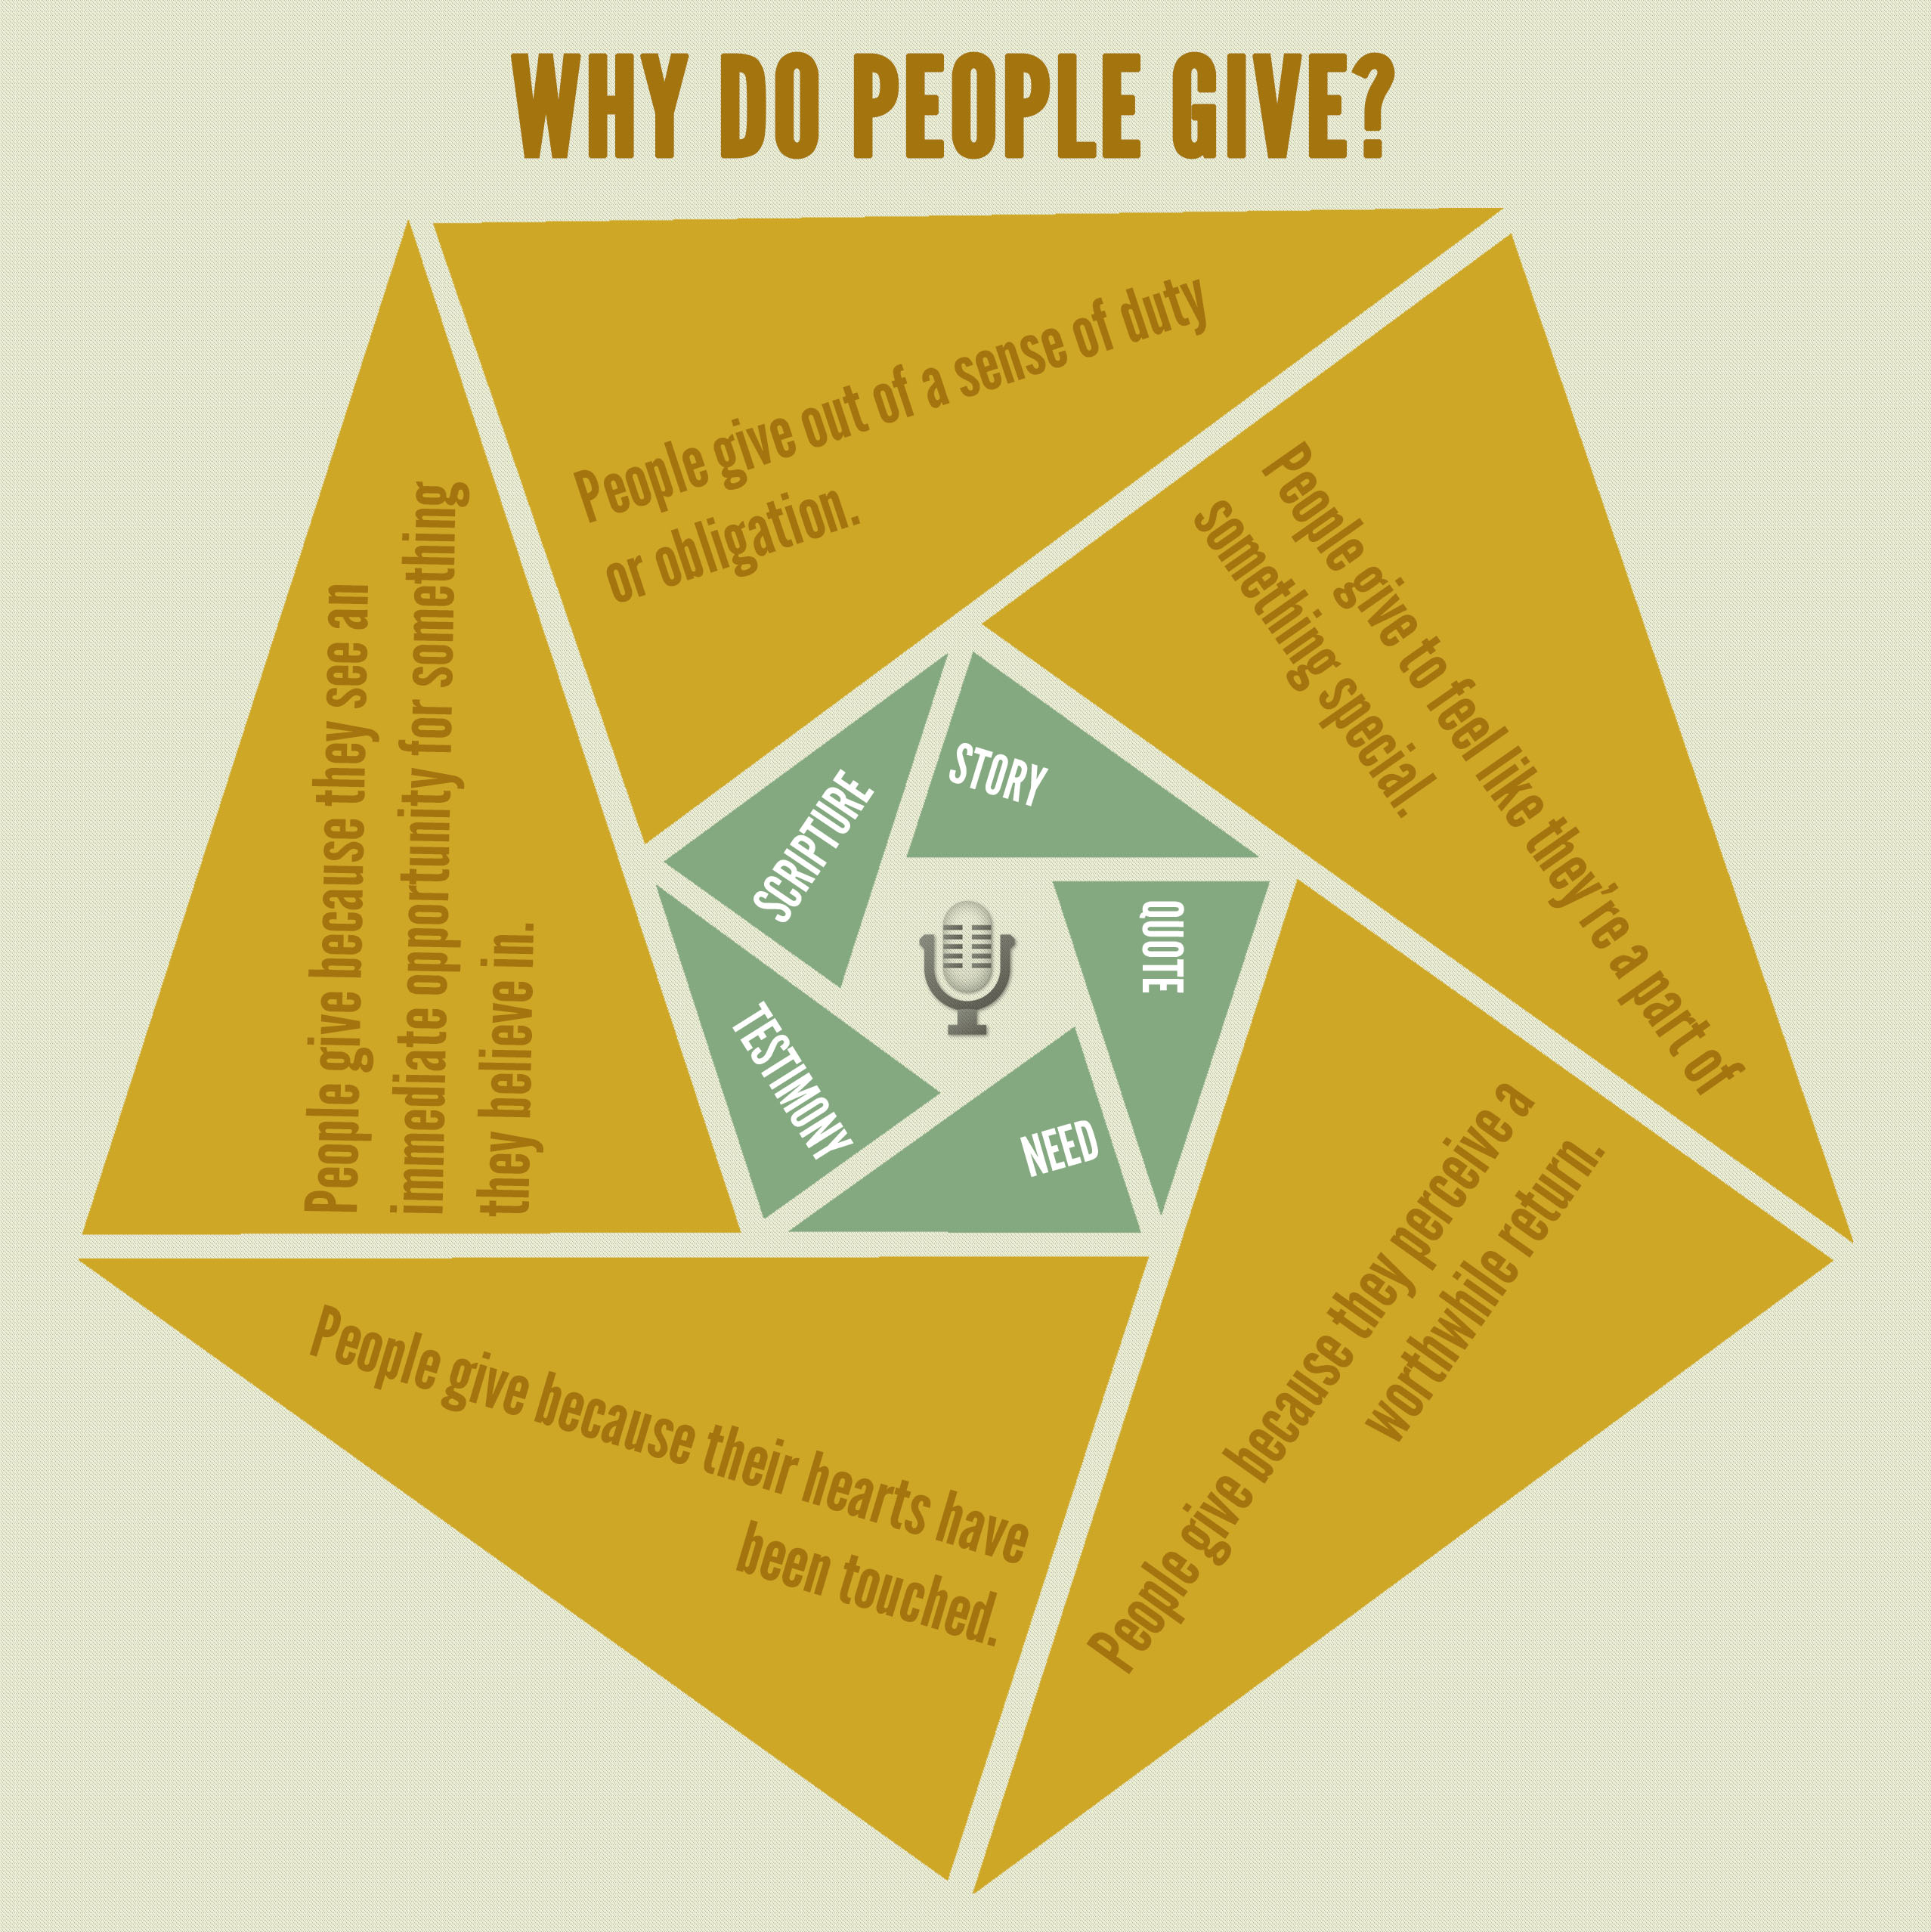 Why do we give?